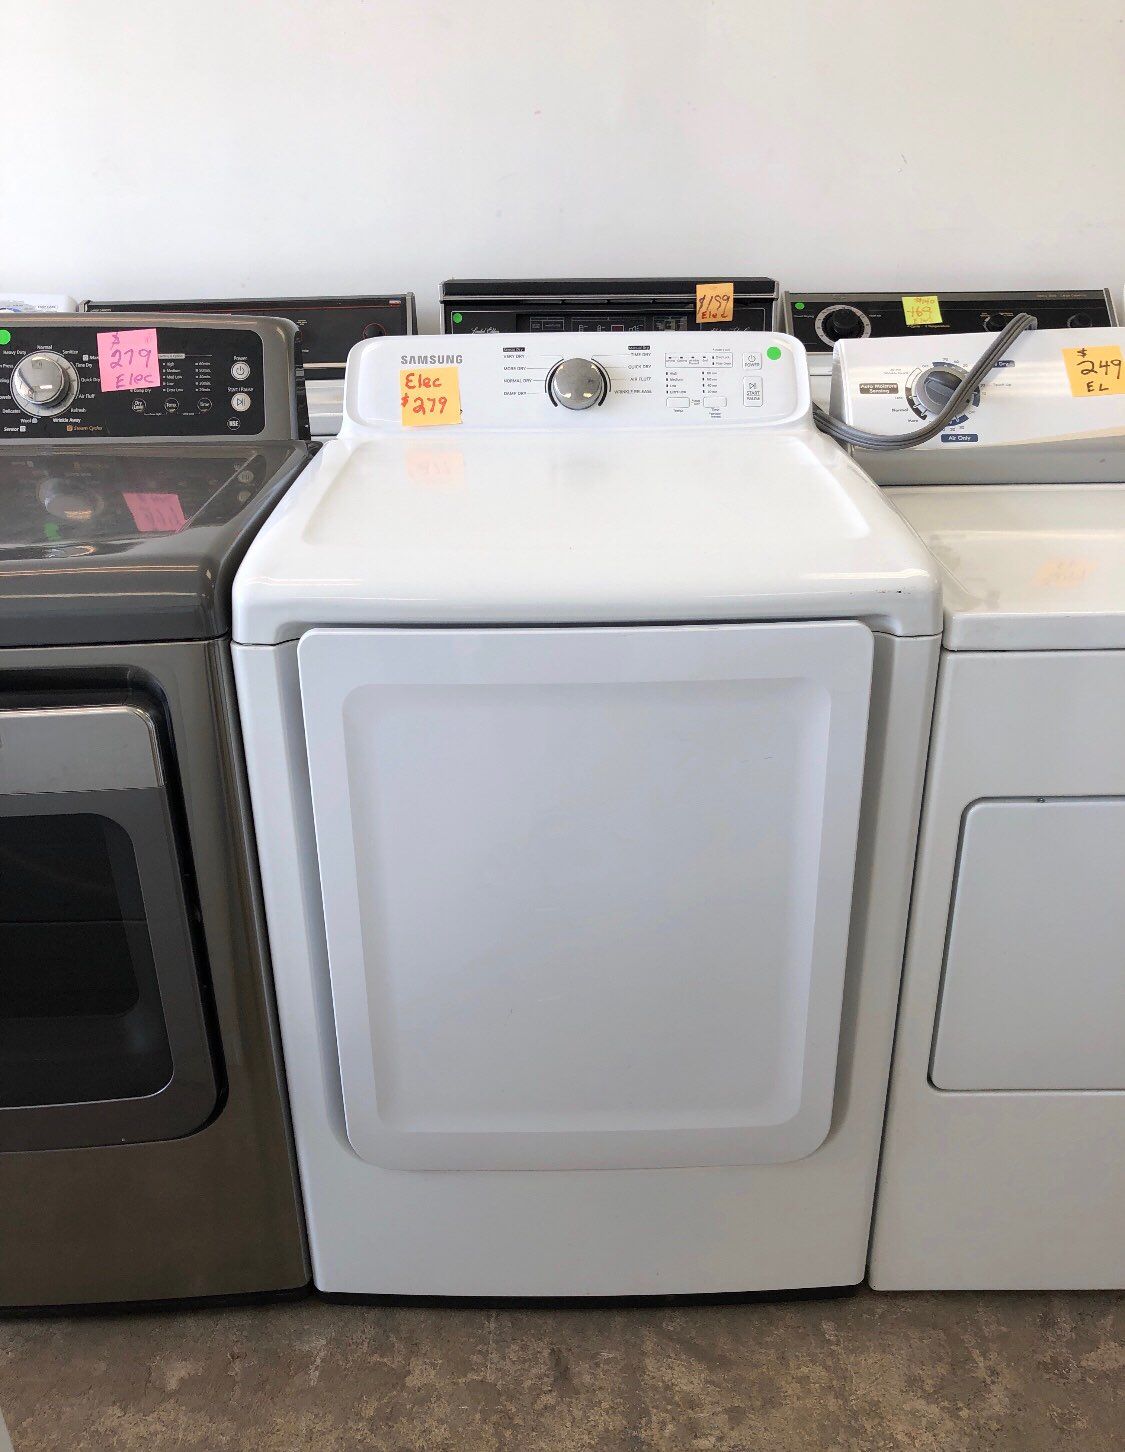 ON SALE! Samsung Electric Dryer Front Load With Warranty #740